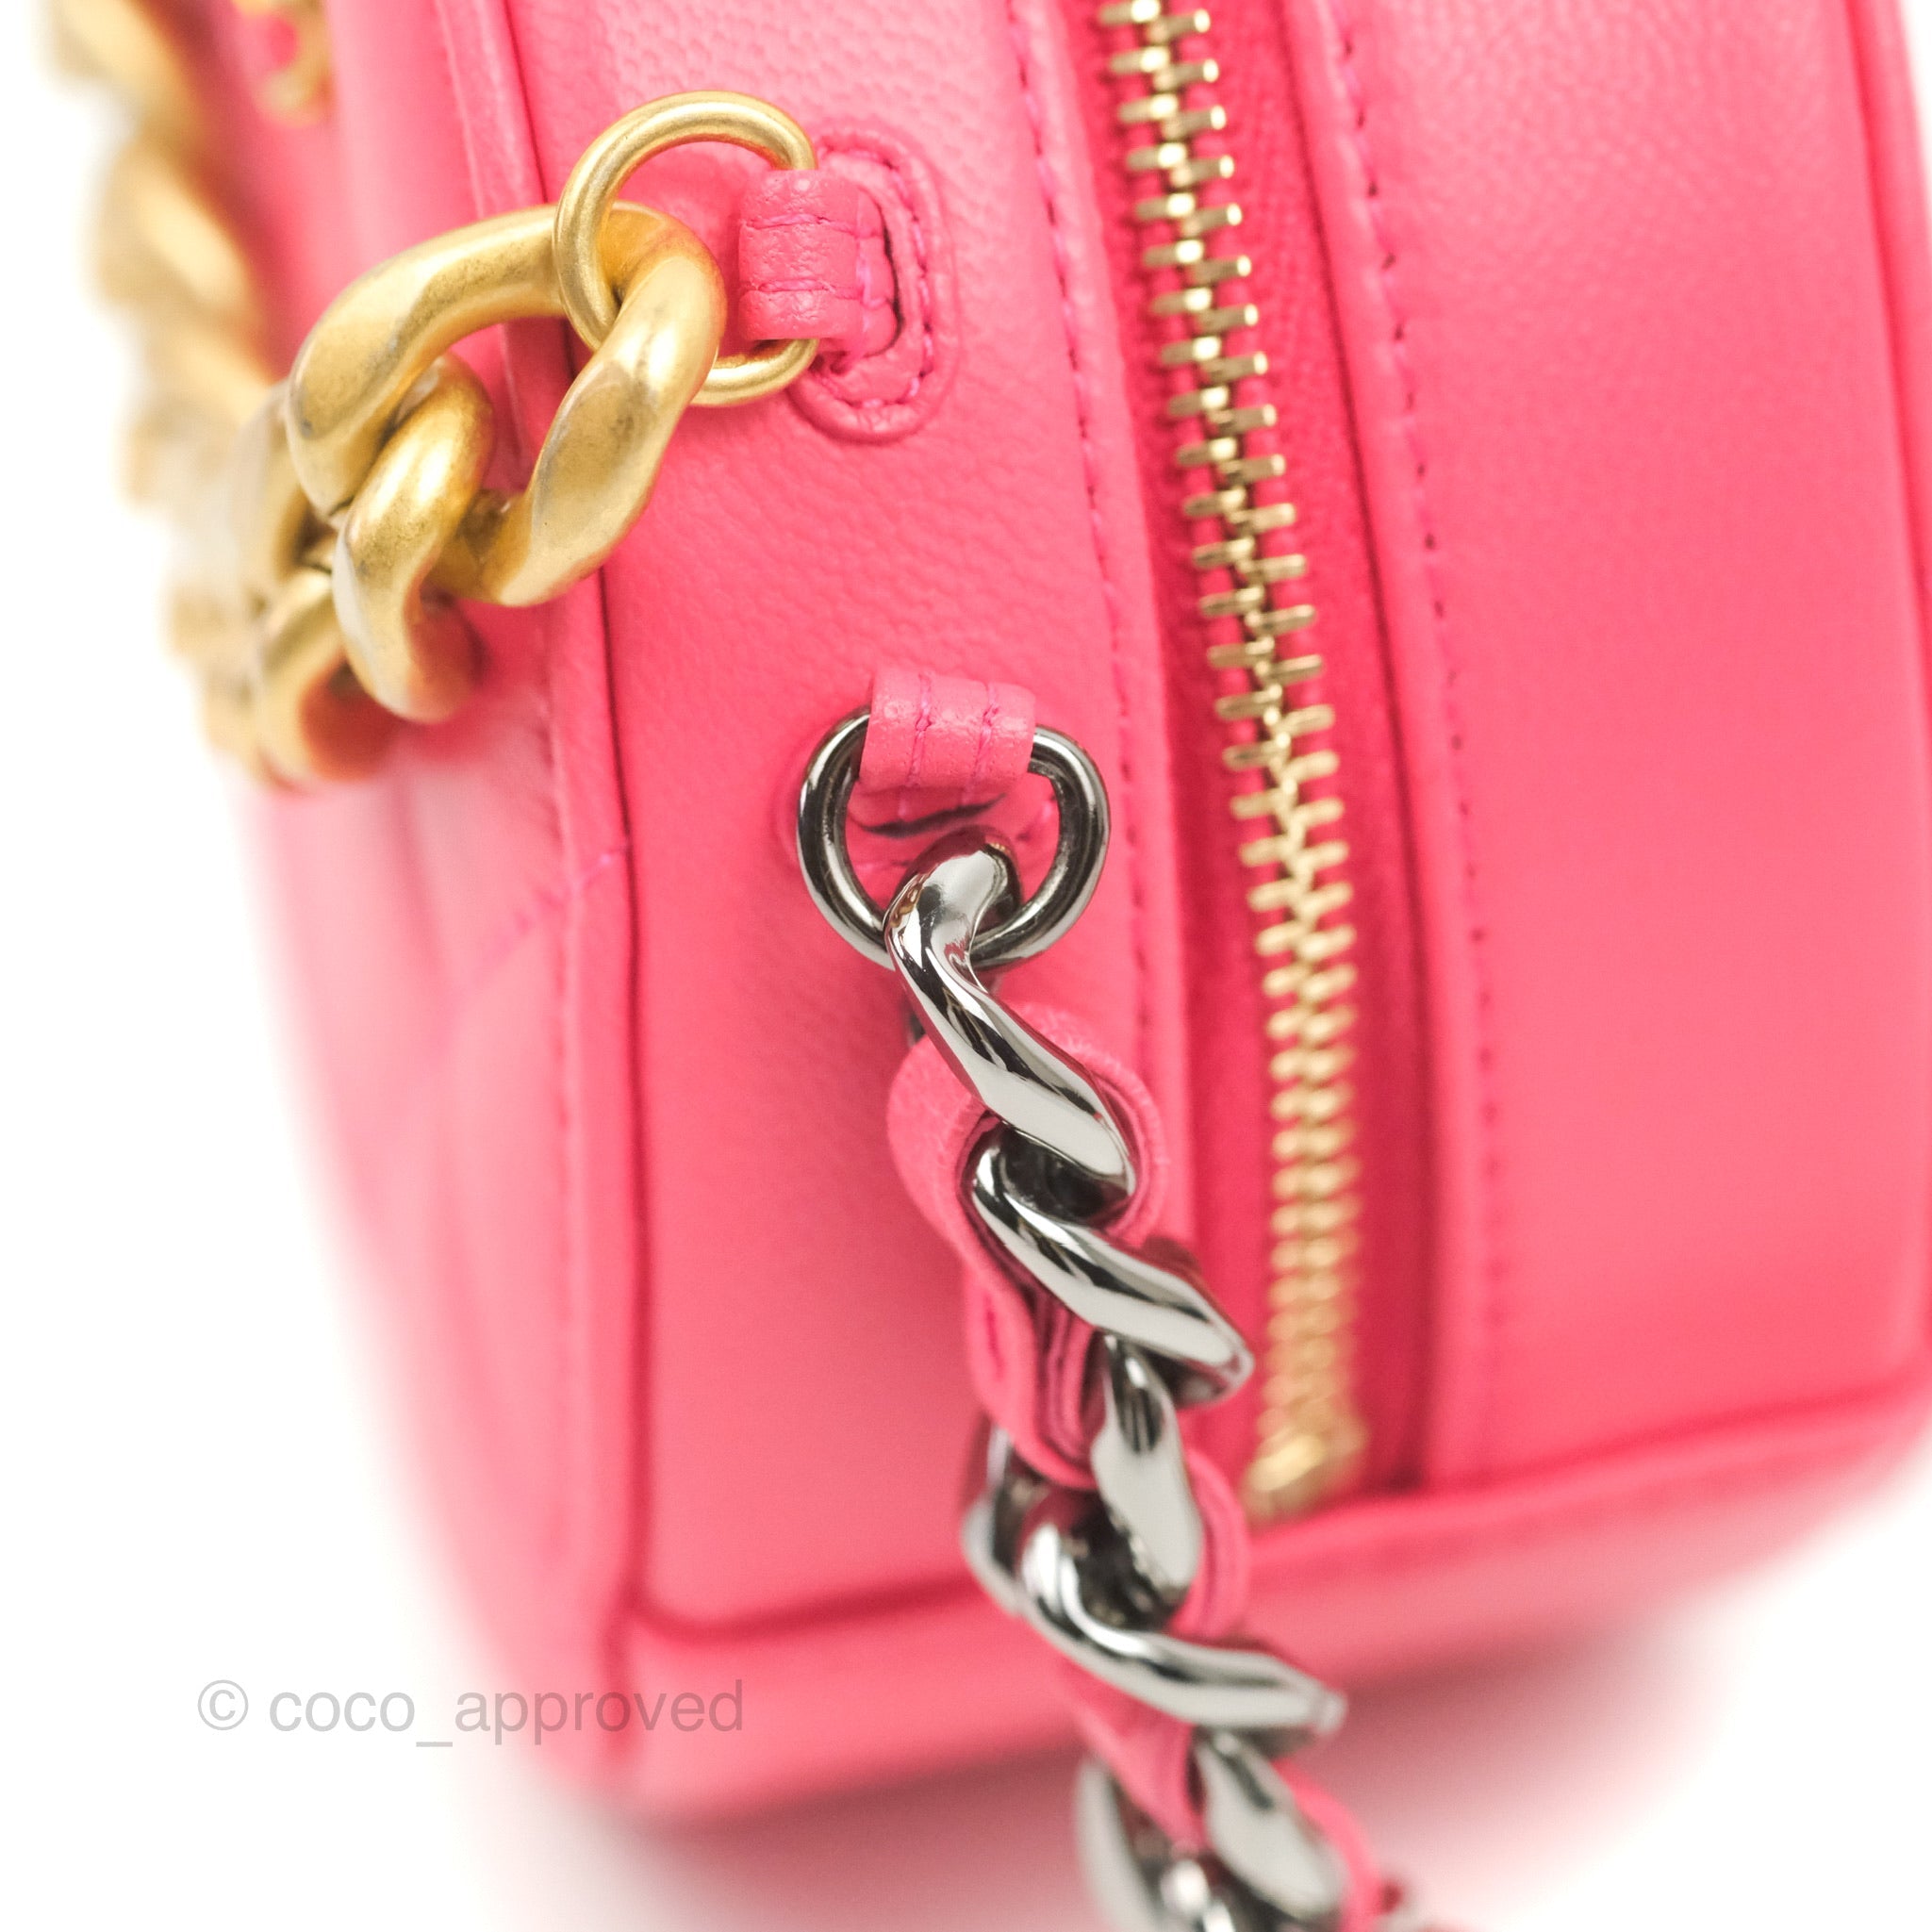 Chanel CHANEL 19 round clutch chain shoulder bag leather pink